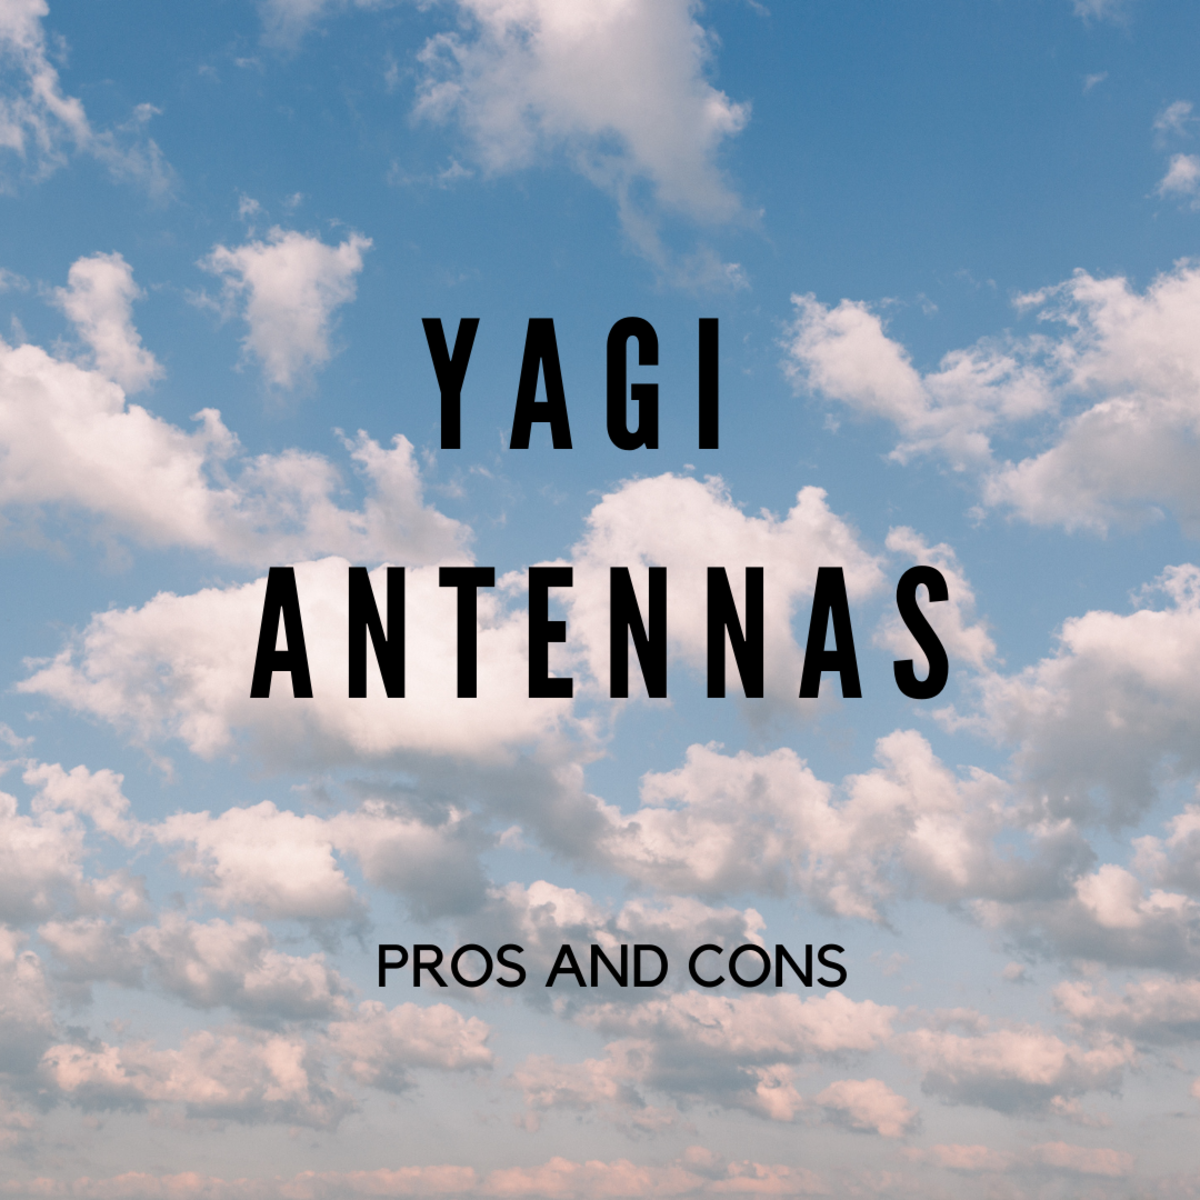 Yagis are commonly used in TV reception, ham radio and as a bridge antenna to connect a site to a Wi-Fi access point.